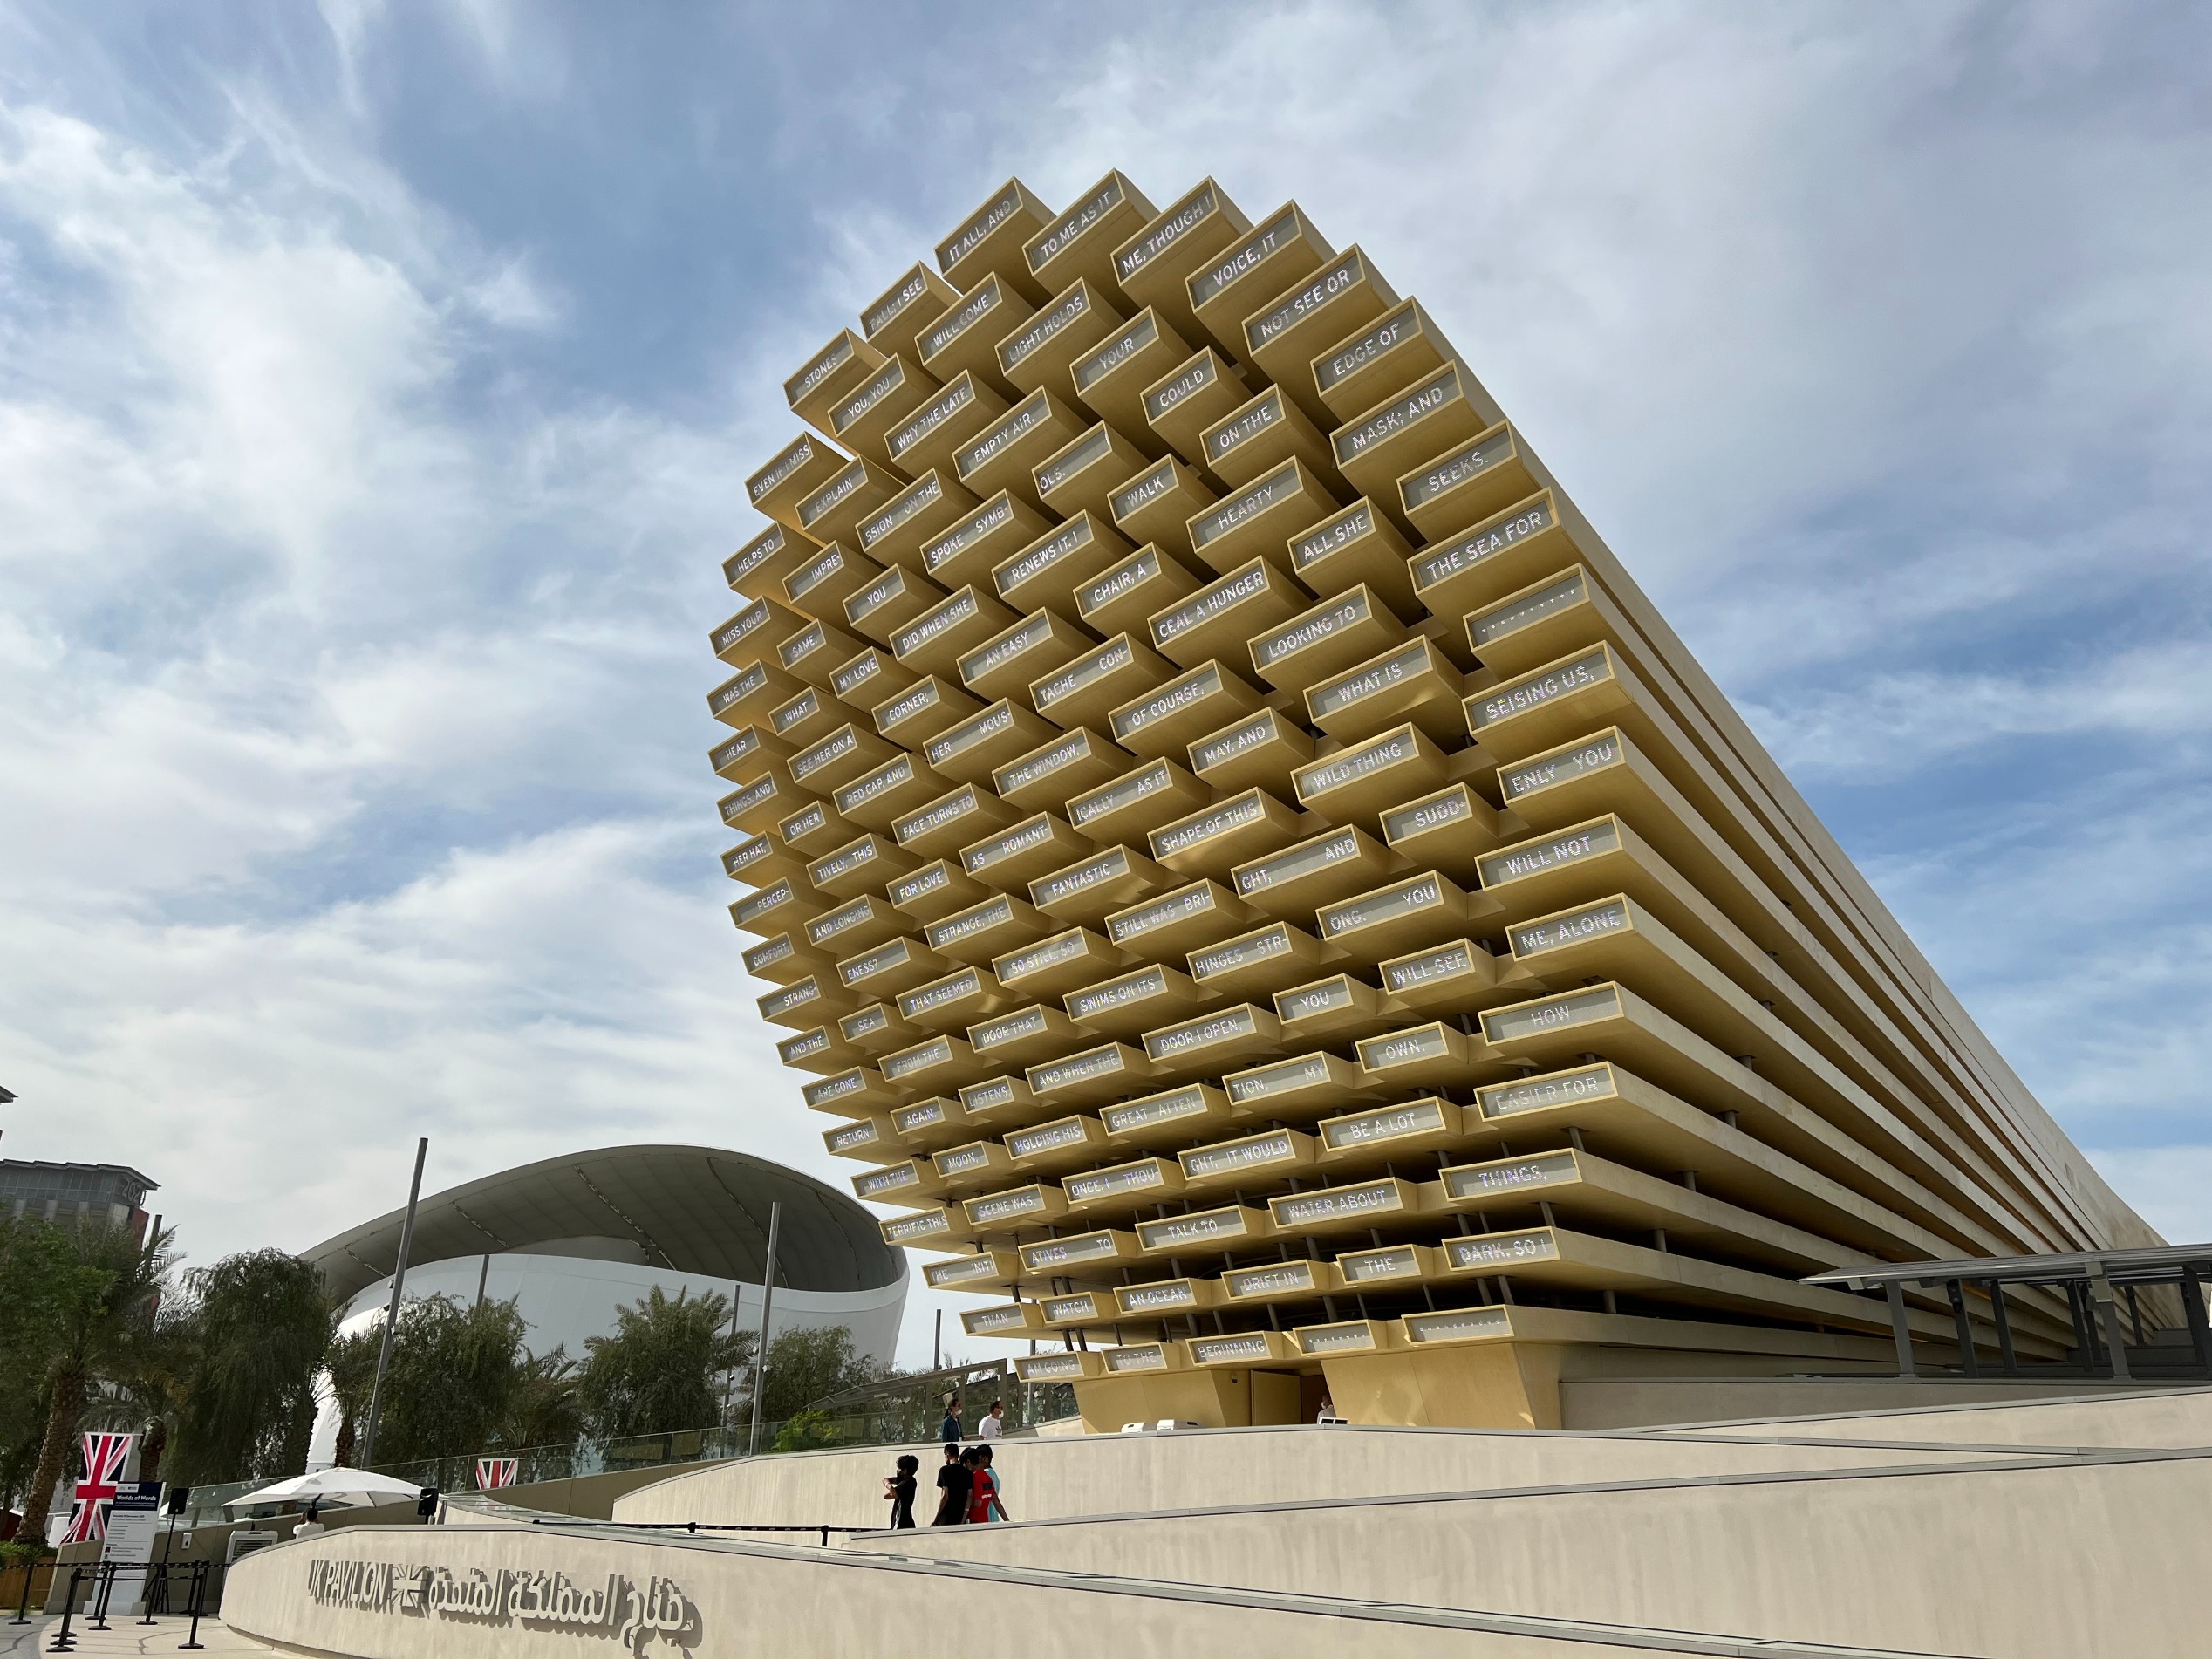 THE COMMON ARCHITECTURAL THEMES OF EXPO 2020